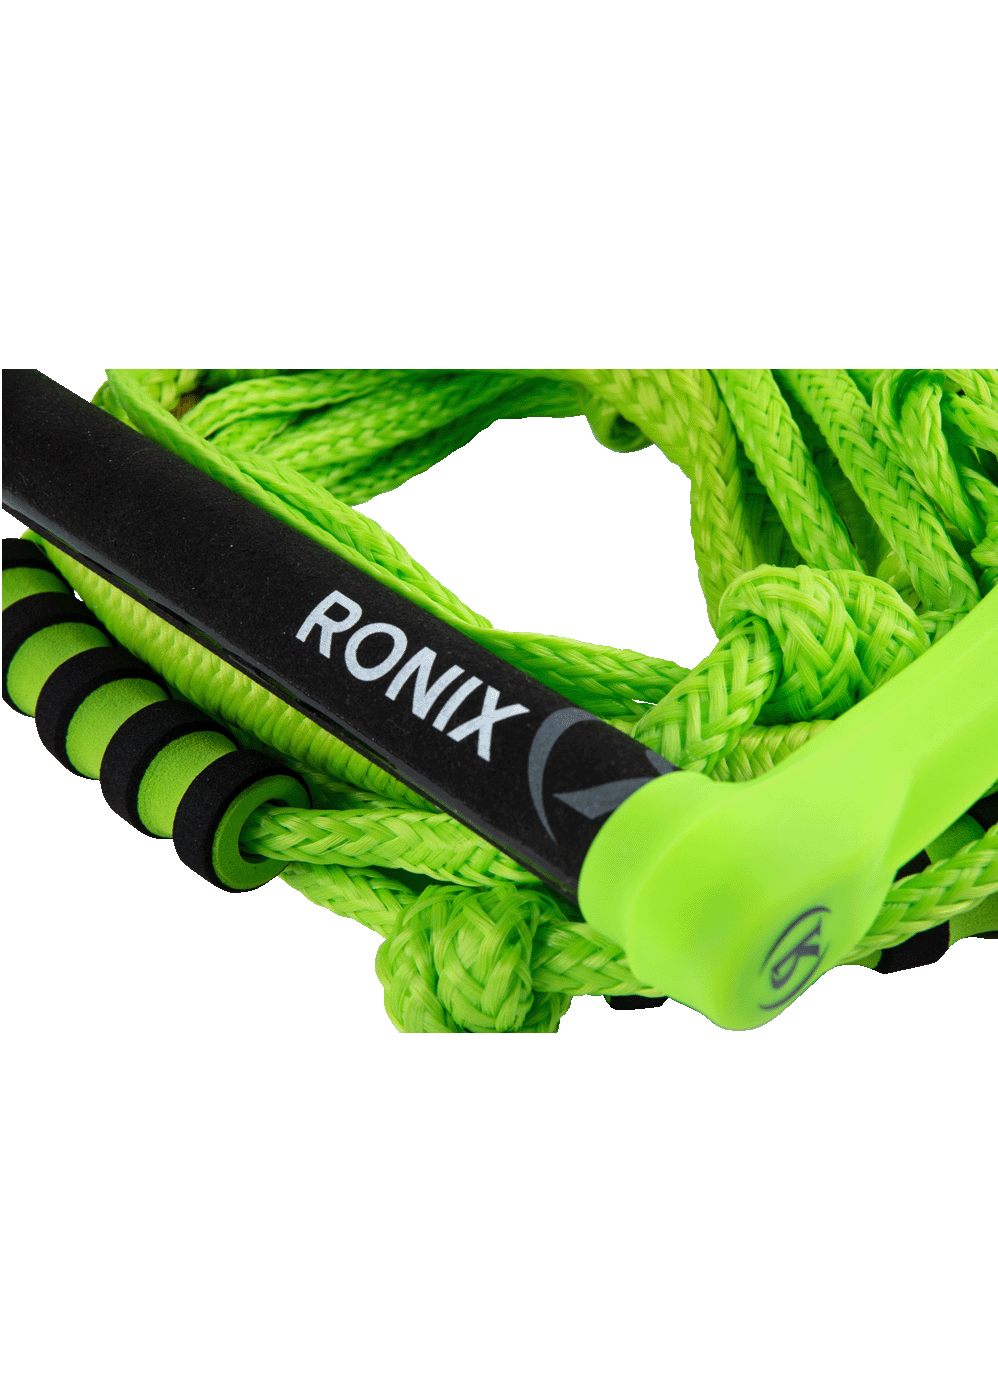 Ronix Silicone Bungee Surf Rope